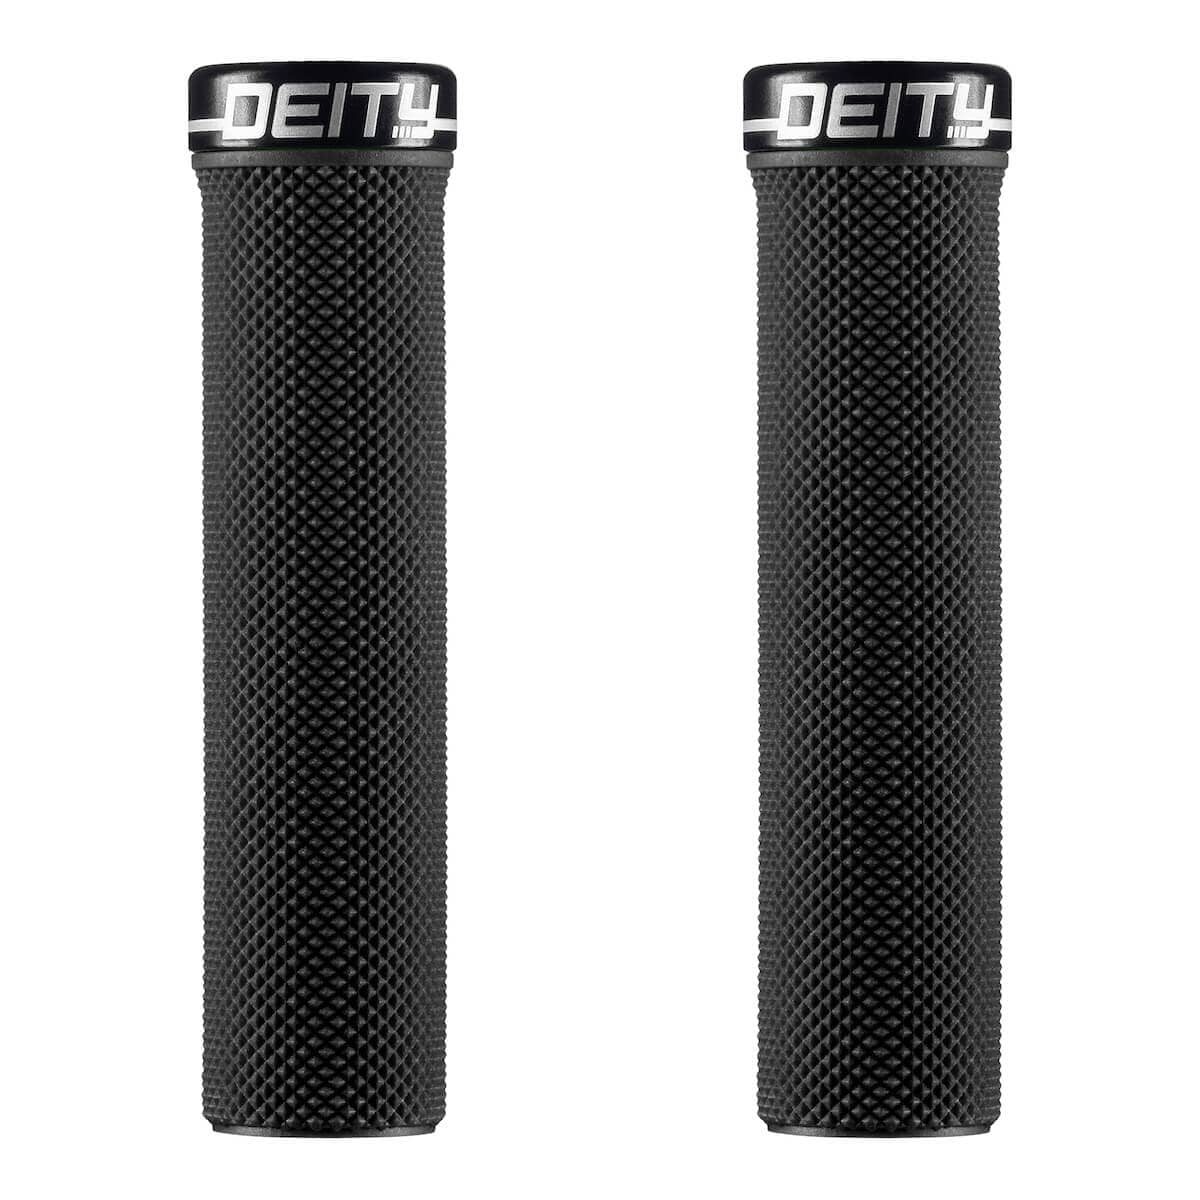 Deity Components Slimfit Grips